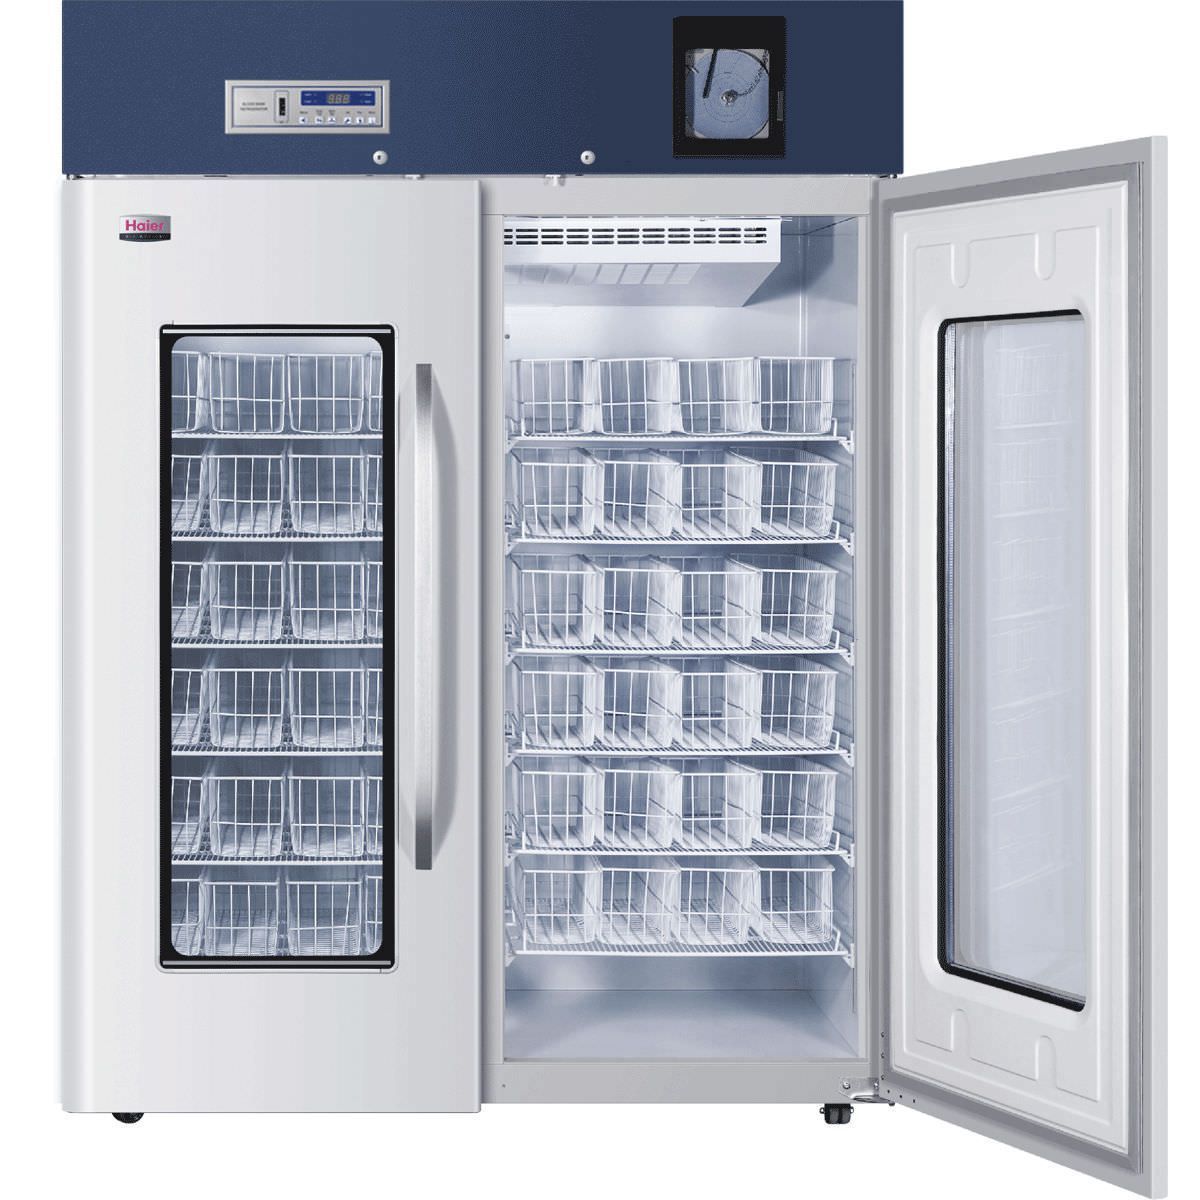 Refrigerator 4 °C , 1308 L | HXC-1308 Haier Medical and Laboratory Products